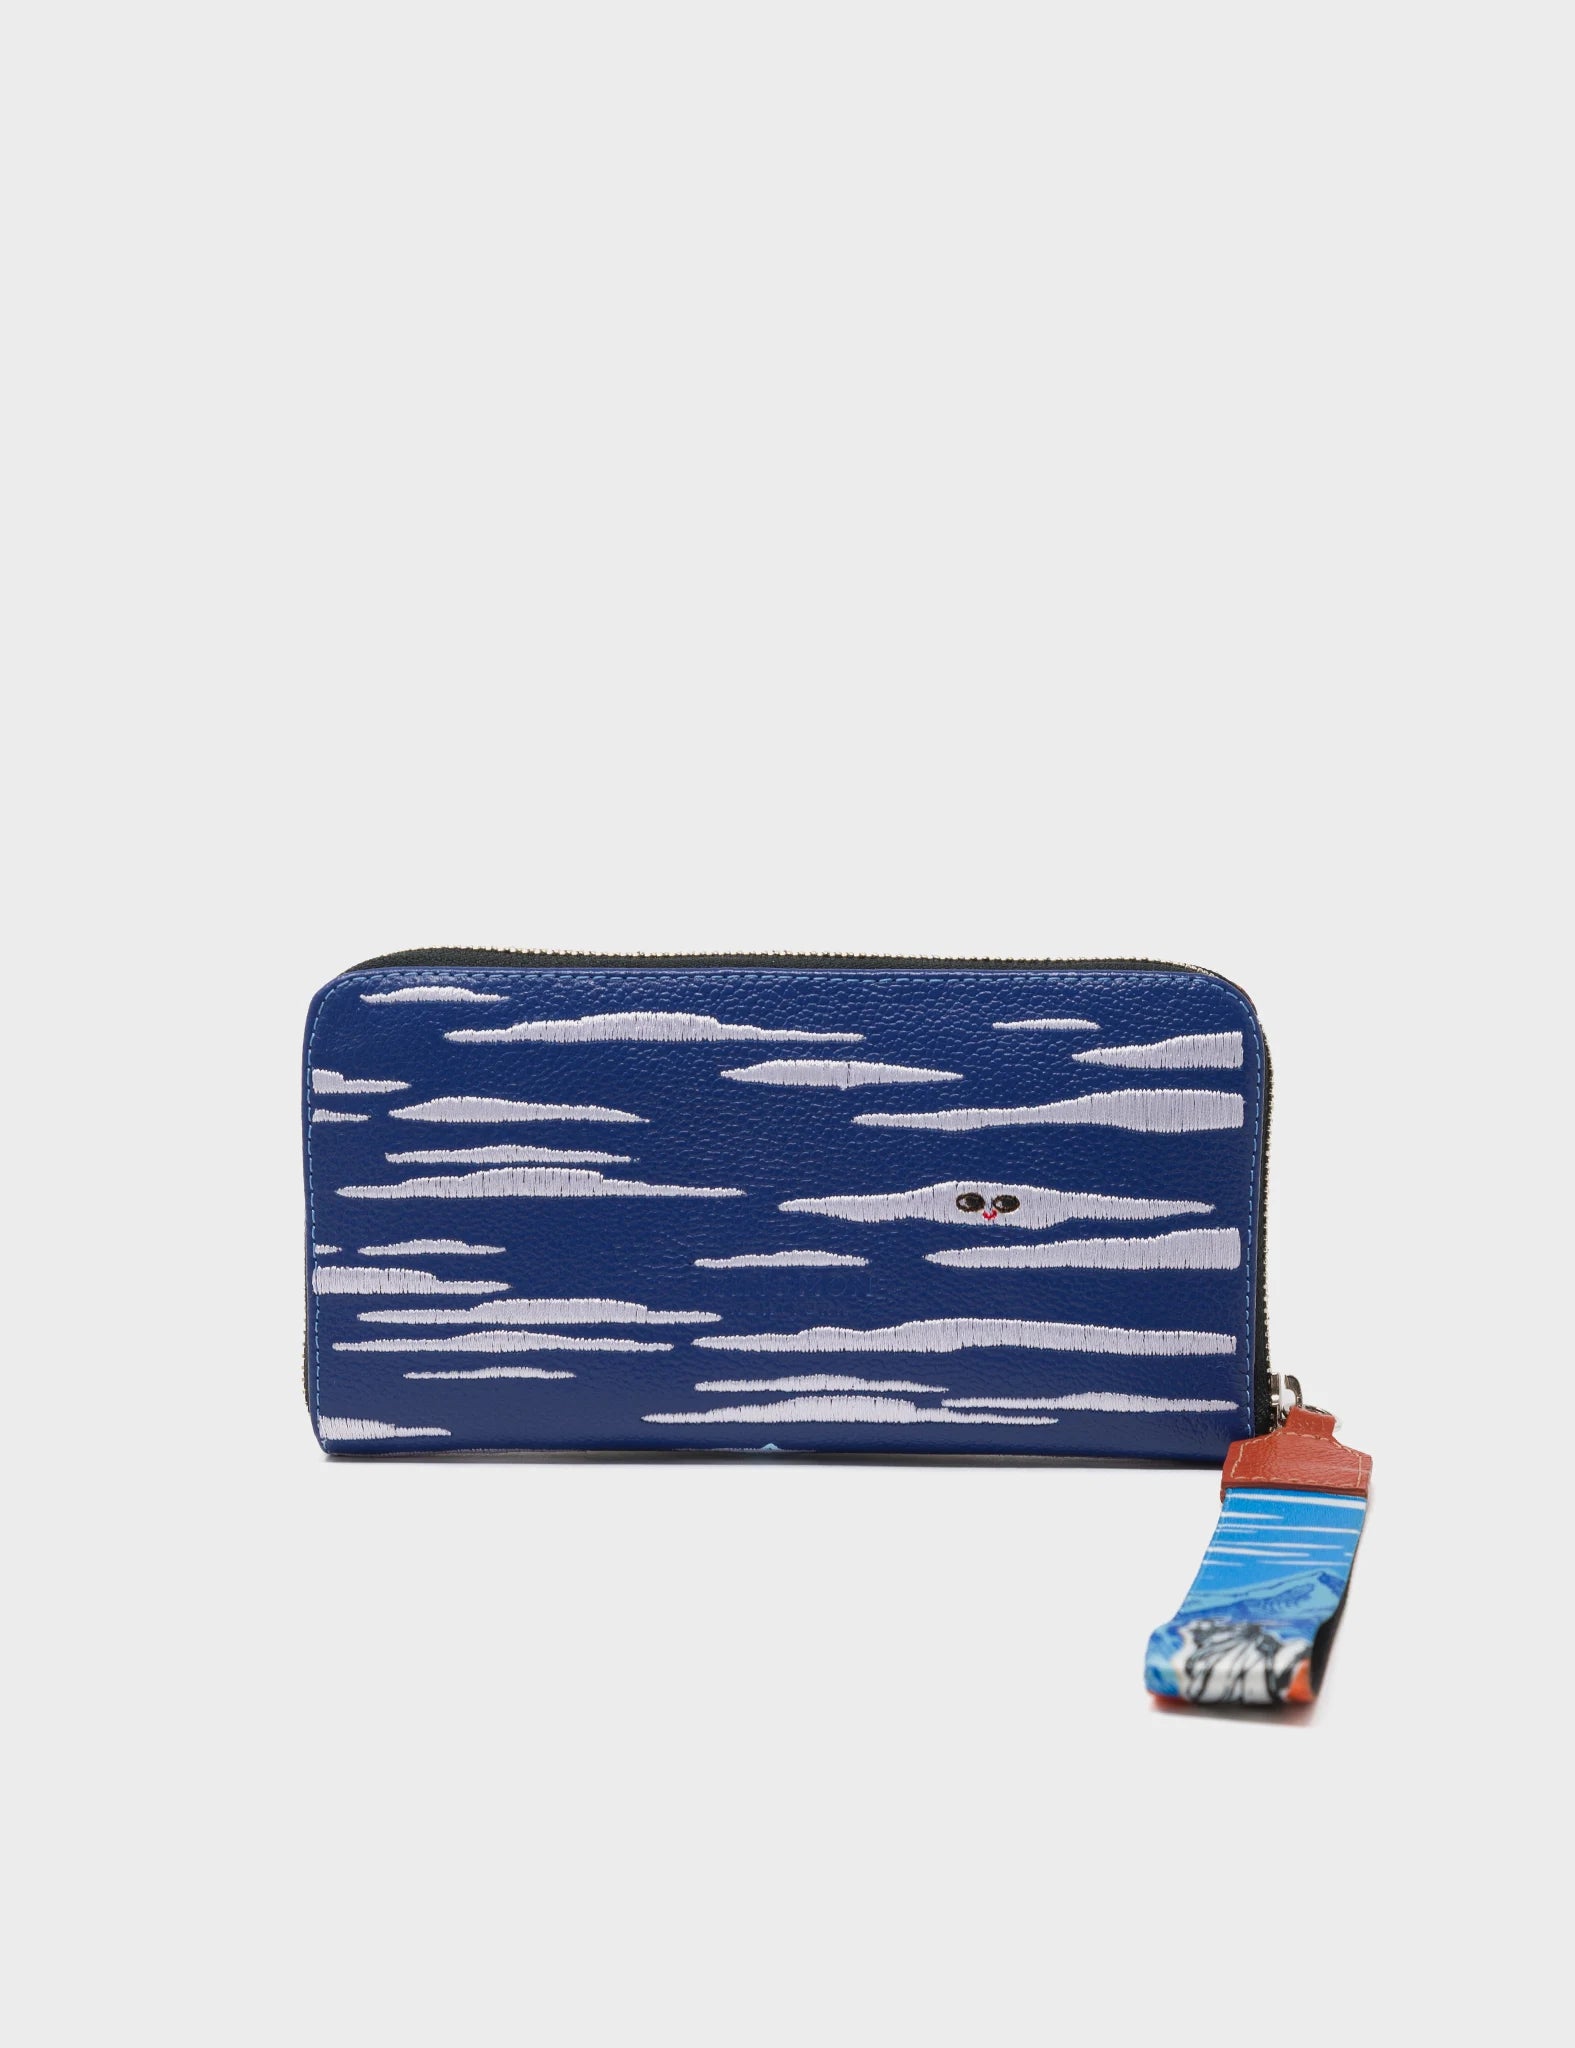 Francis Royal Blue Leather Wallet - Desert, Mountains and Flowers Design